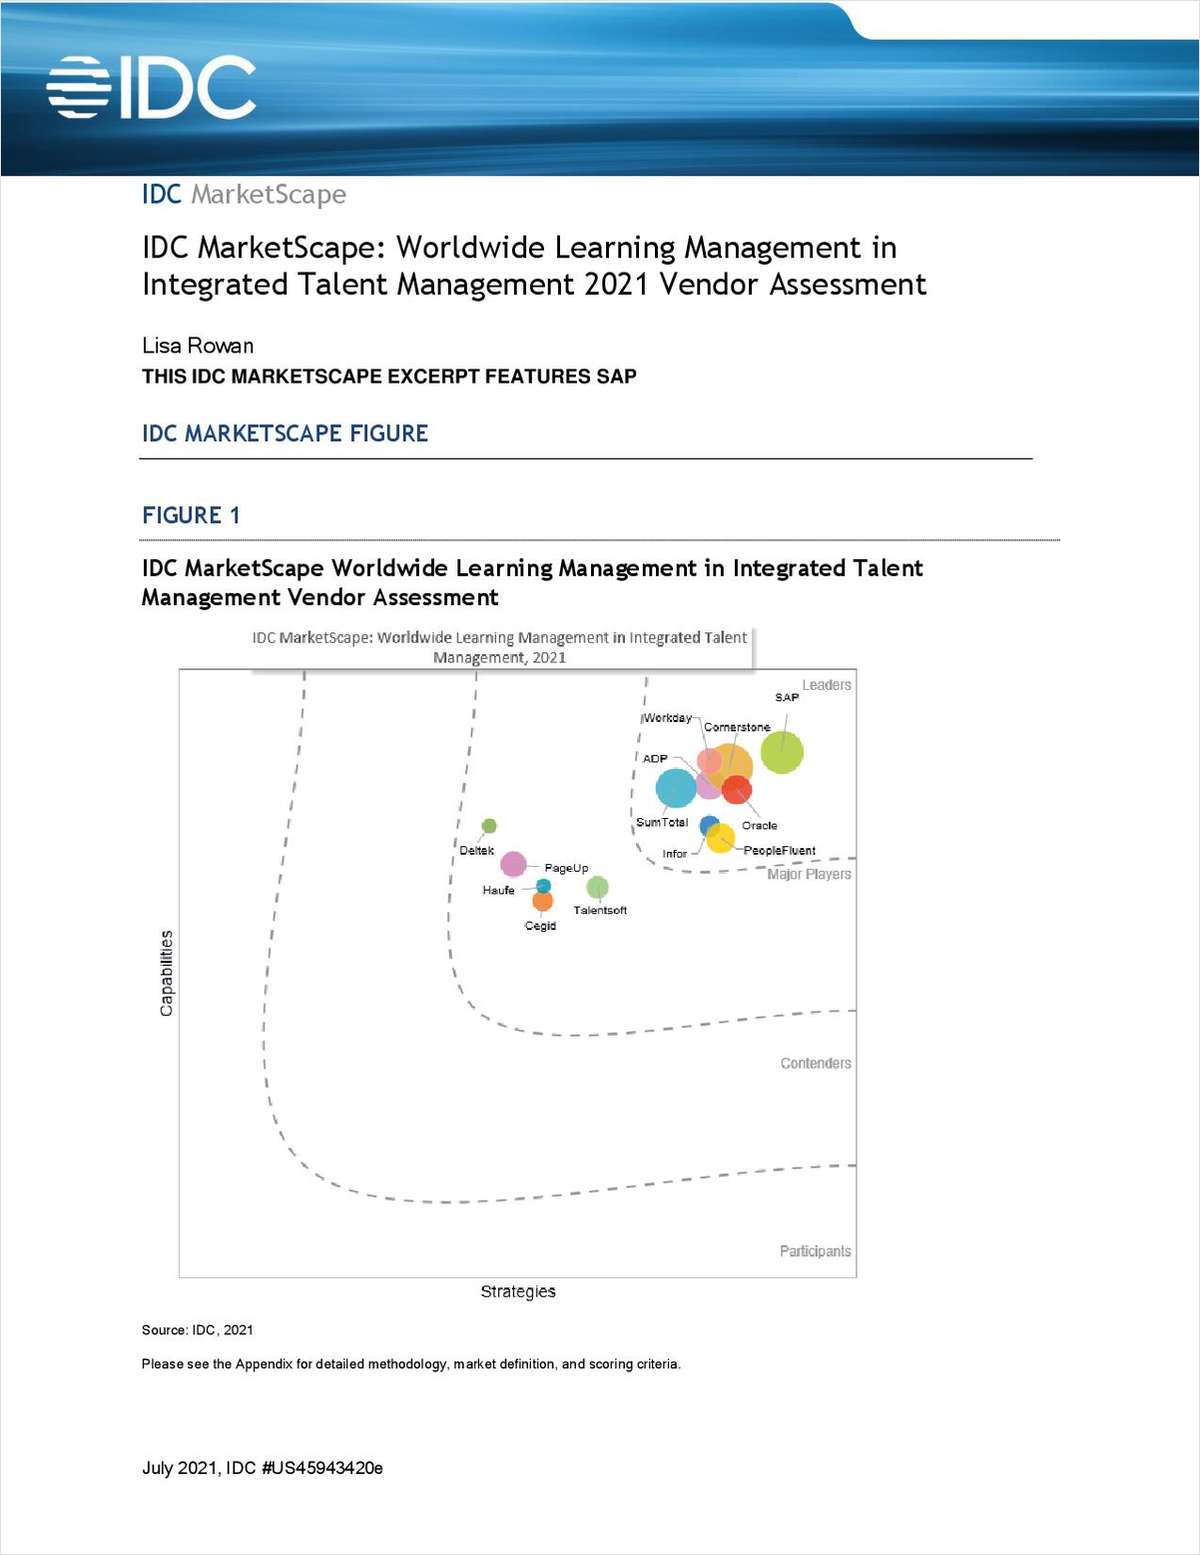 IDC MarketScape: Worldwide Learning Management in Integrated Talent Management 2021 Vendor Assessment